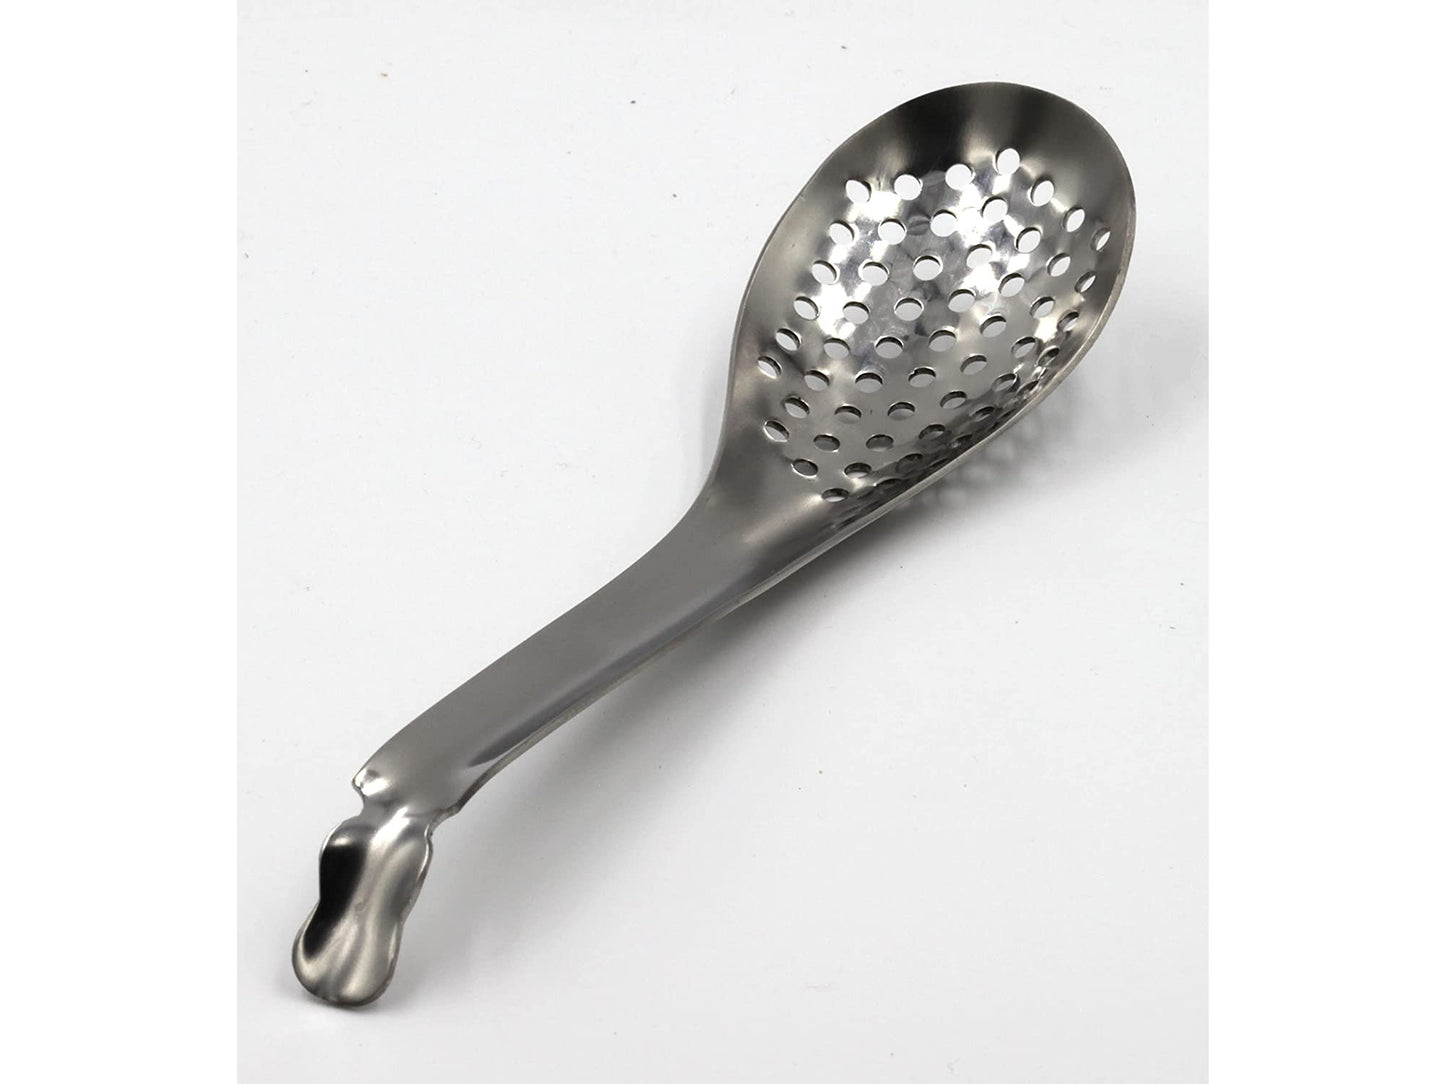 Perforated "Spherification" Spoon (use with 50 Gram and larger jars) for Balsamic and Olive Oil Caviar/Pearls - Eastern Shore Products